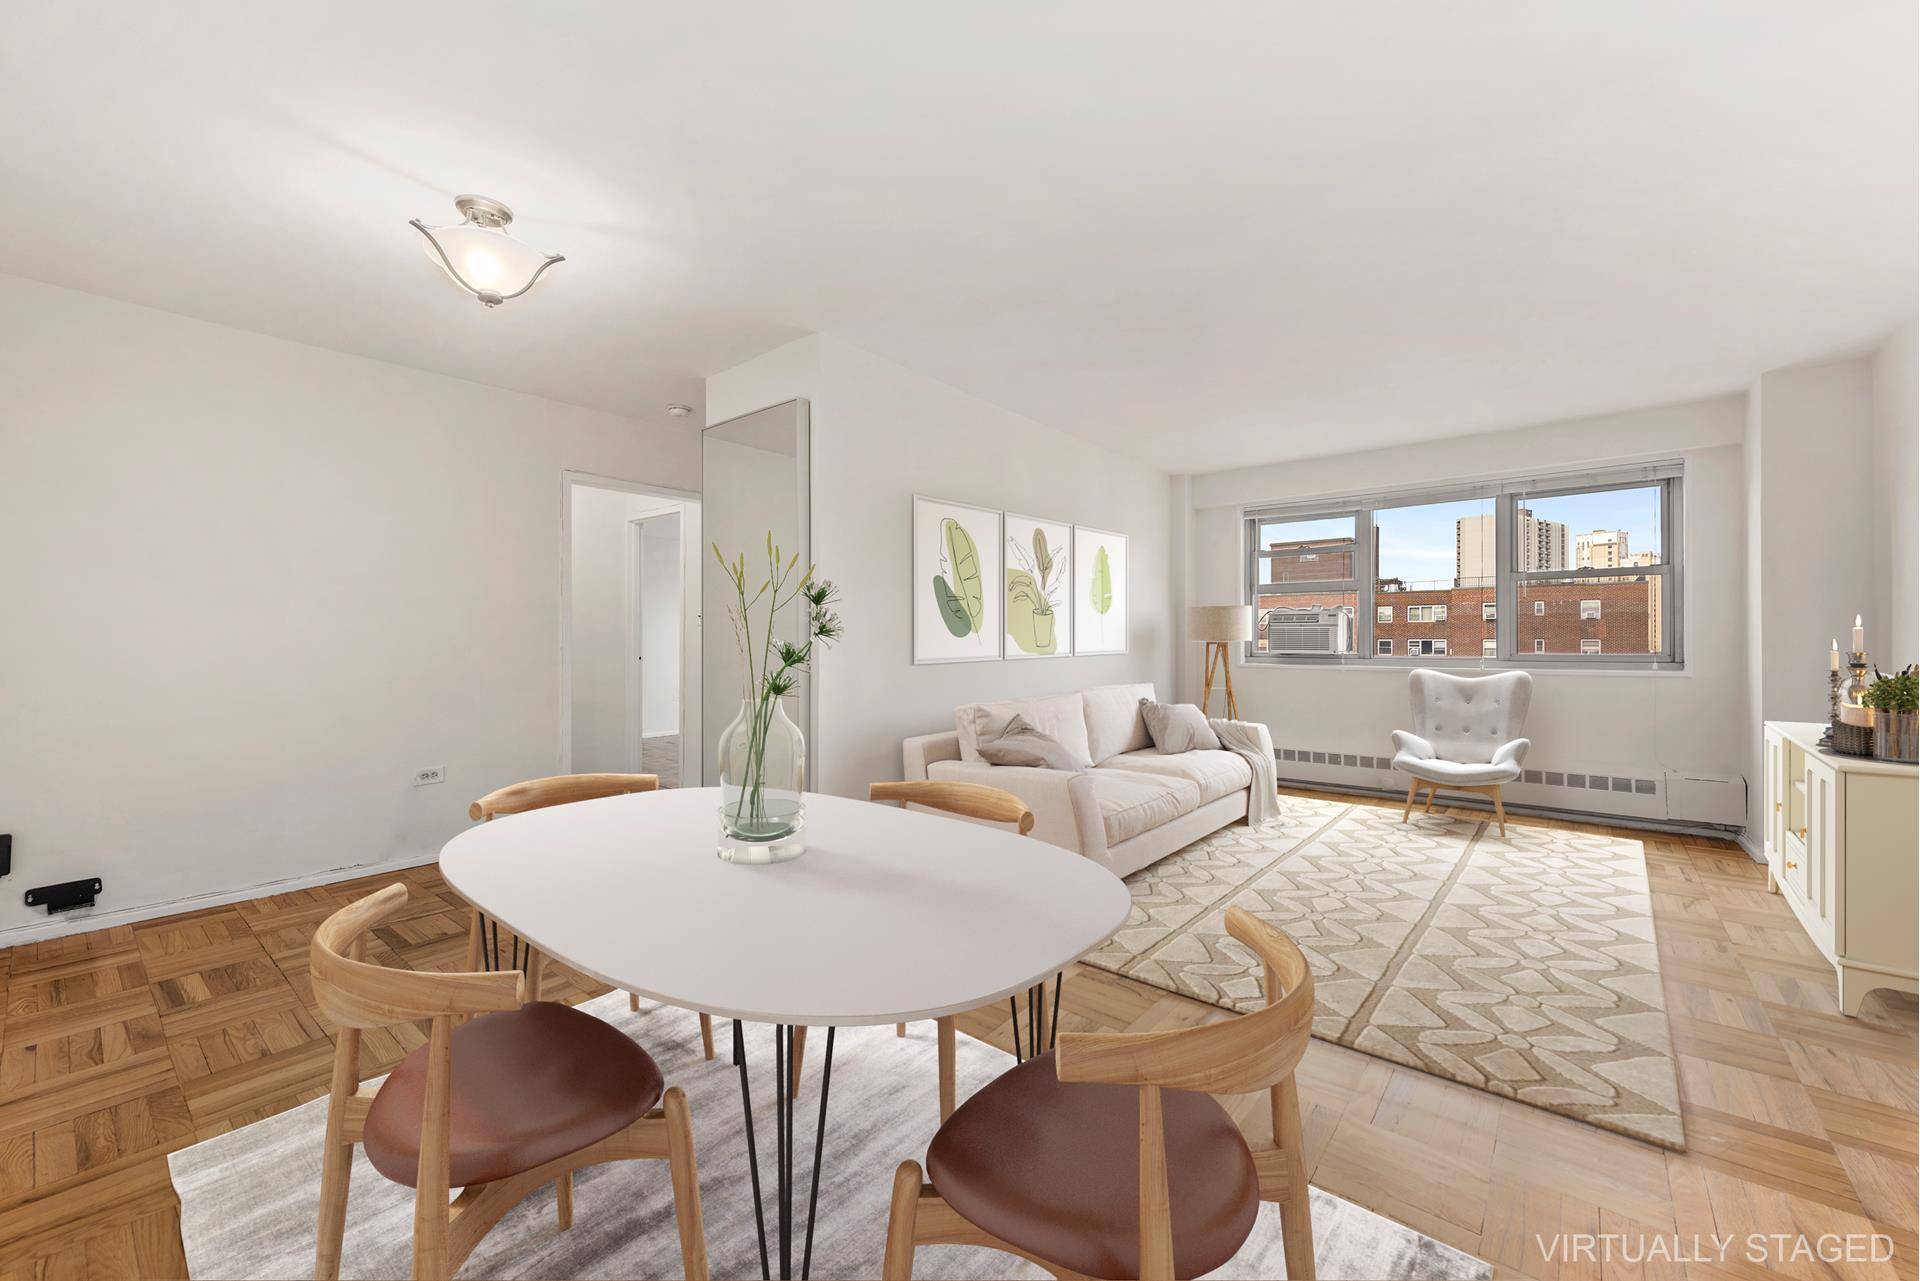 This bright one bedroom, one bath apartment has over 600 square feet of well laid out living space, a renovated windowed kitchen, renovated bath and original parquet wood flooring.